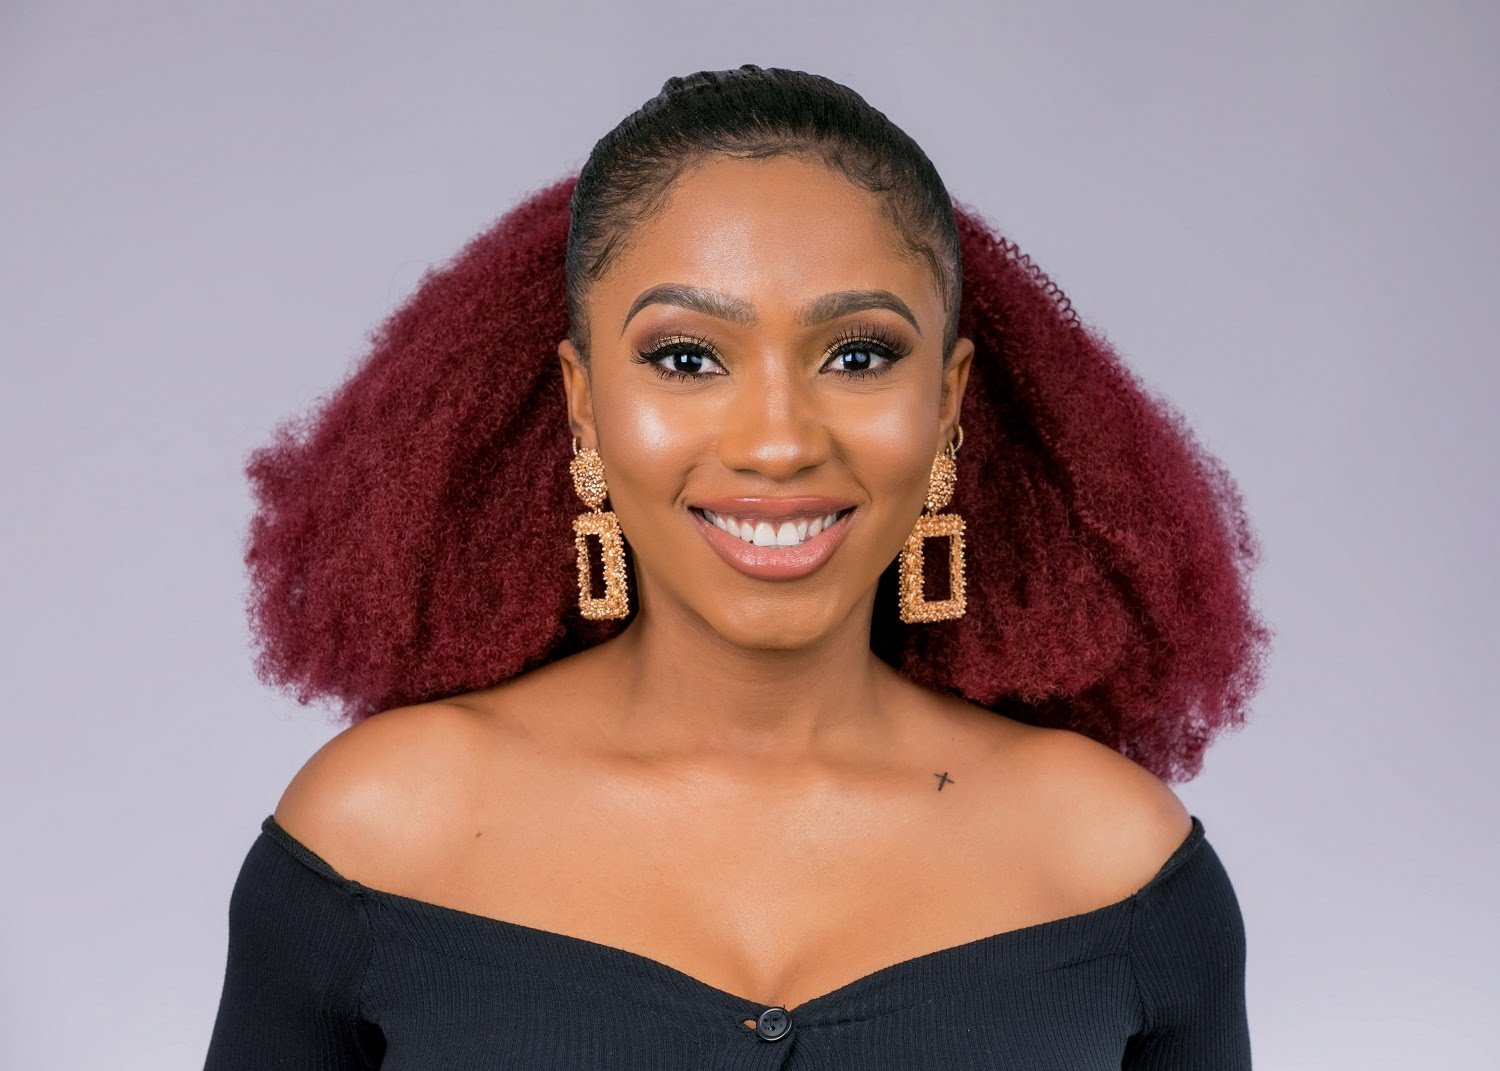 BBNaija's Mercy Eke Claims She Will Not Get Involve With Any Male Housemate If She's Given The Chance To Go Back To The House